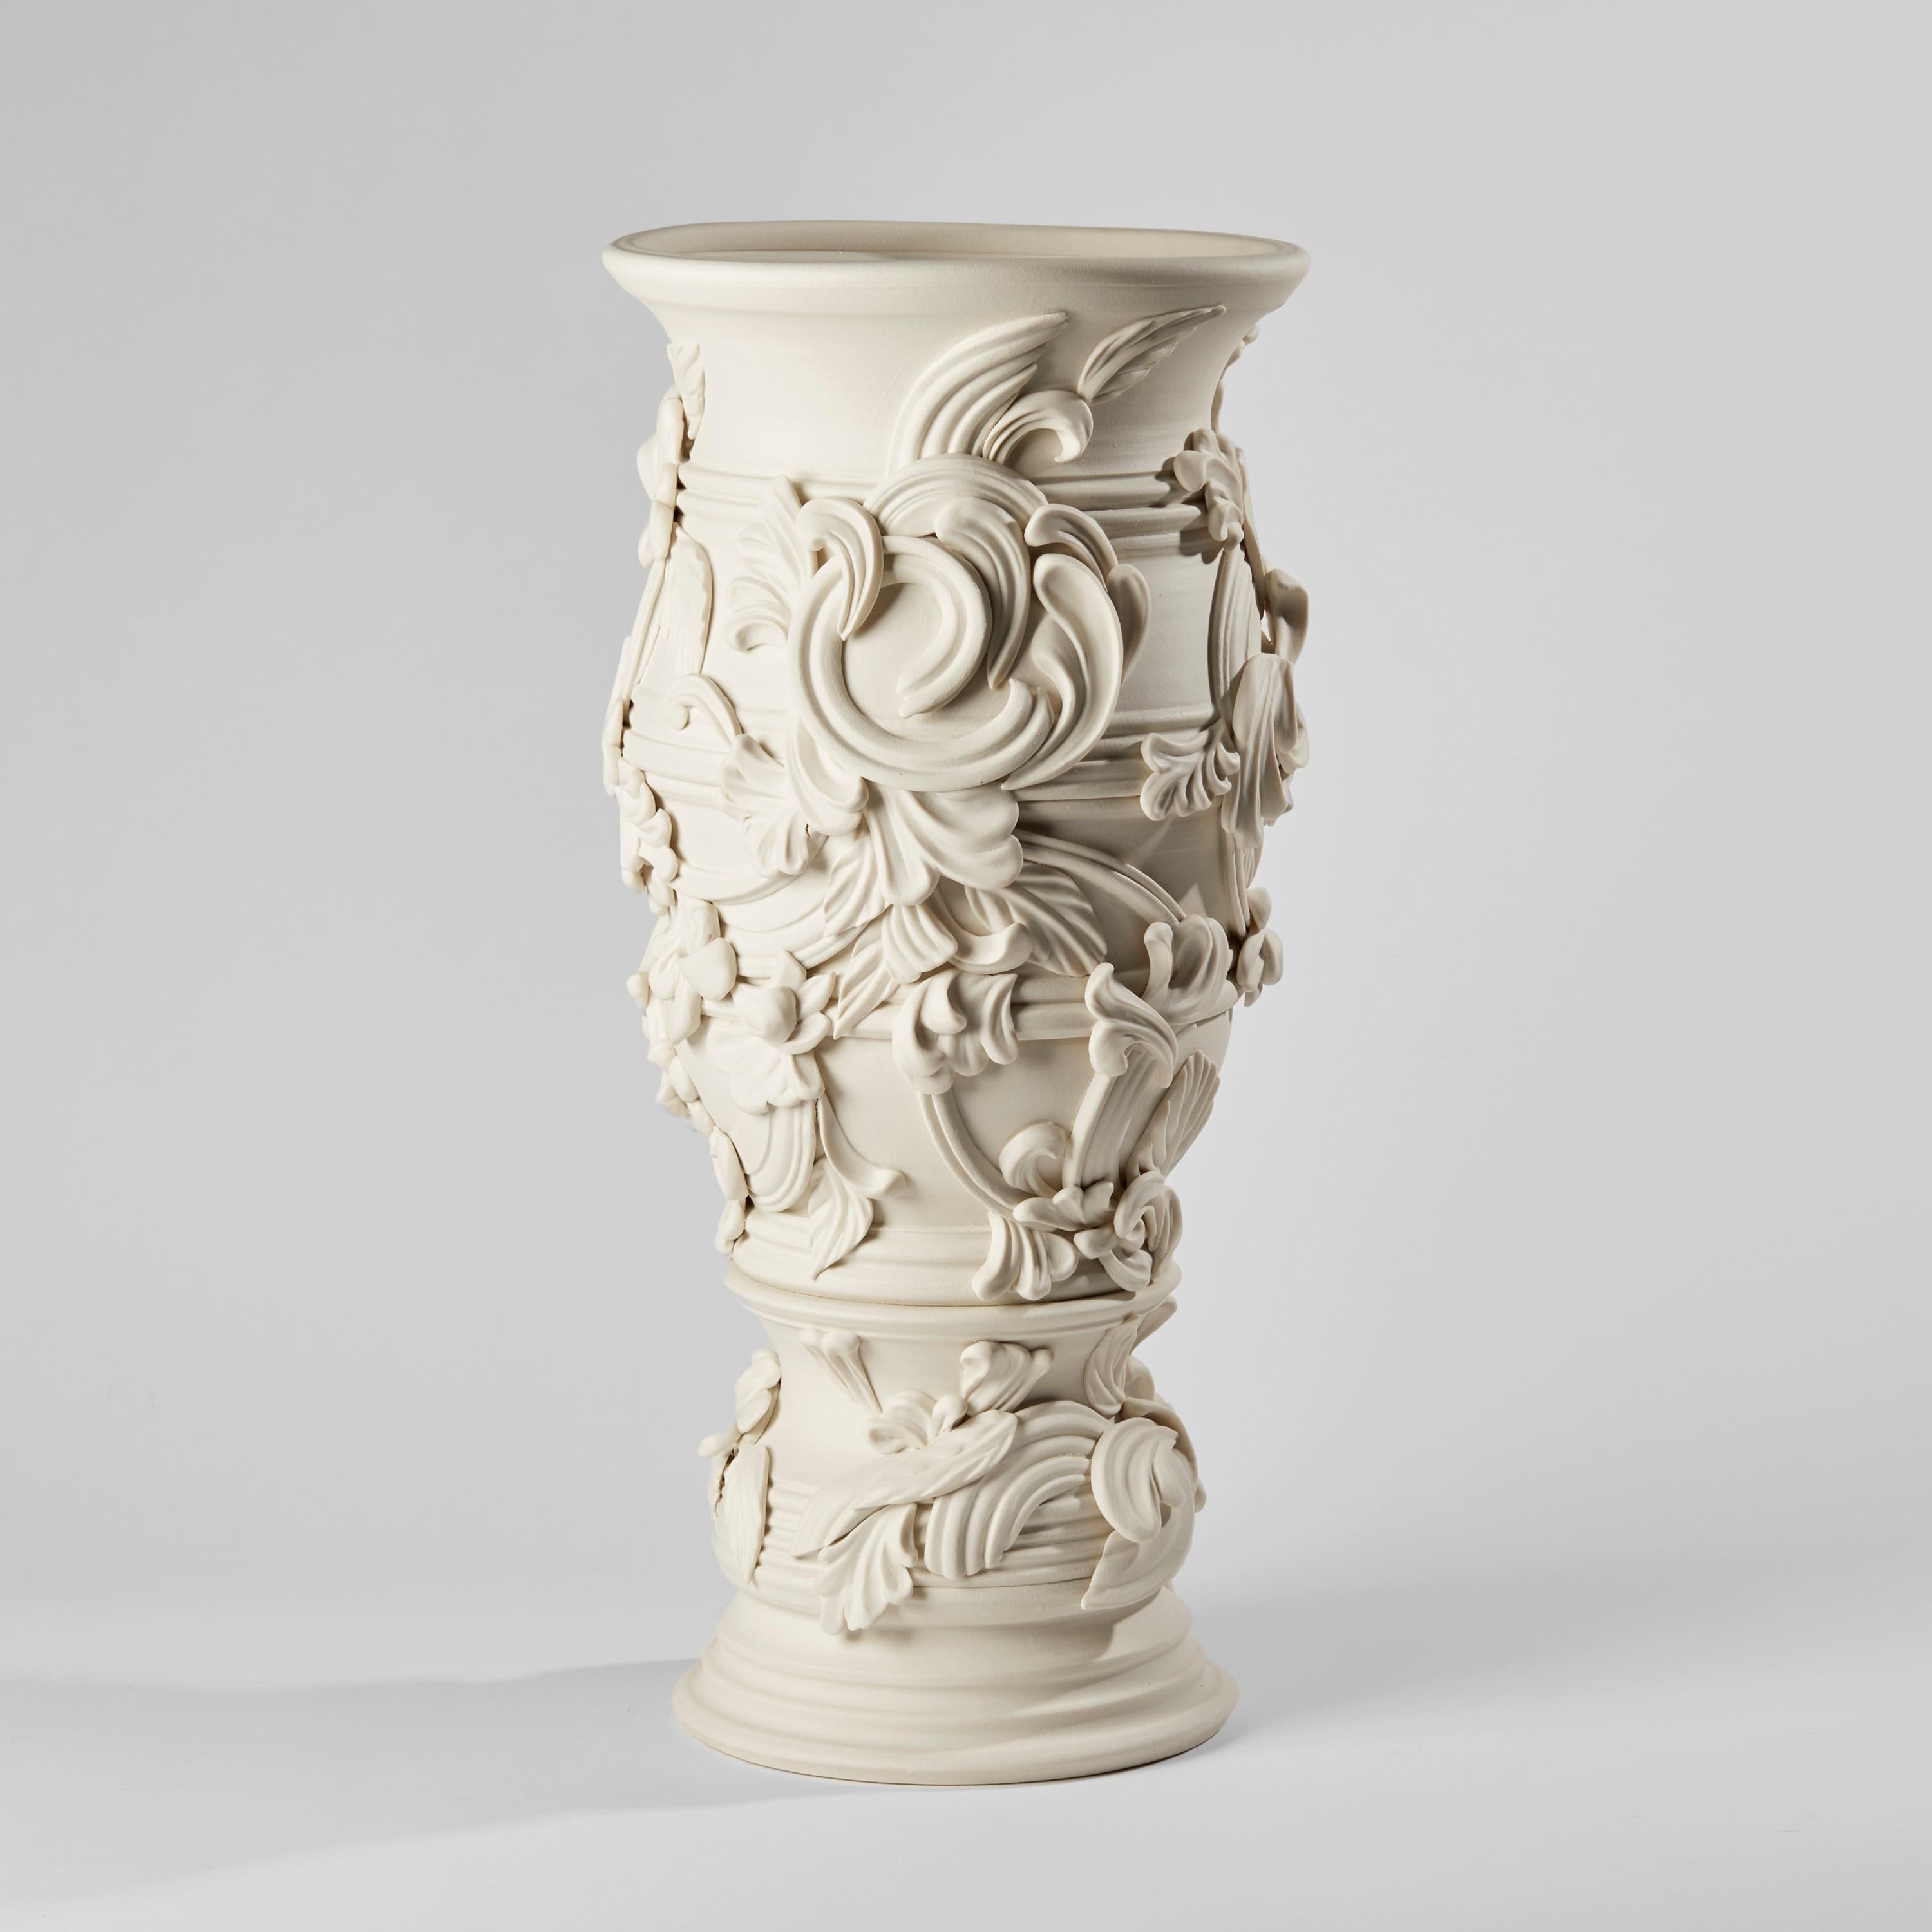 Hand-Crafted Promenade IV, a Unique Ceramic Sculptural Tall Vase in Porcelain by Jo Taylor For Sale